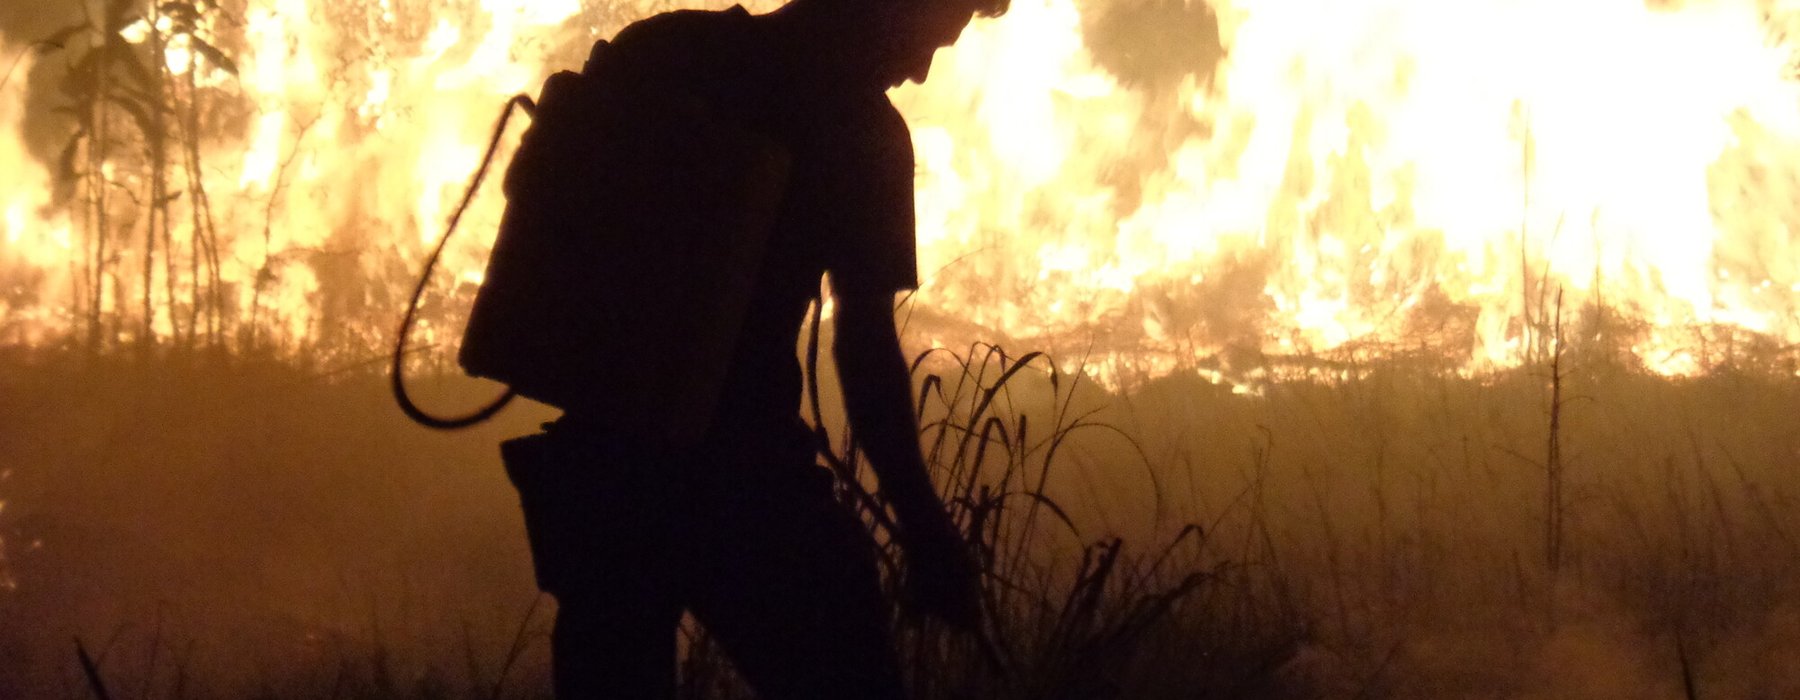 A silhouetted firefighter stands among flames in the rainforest.